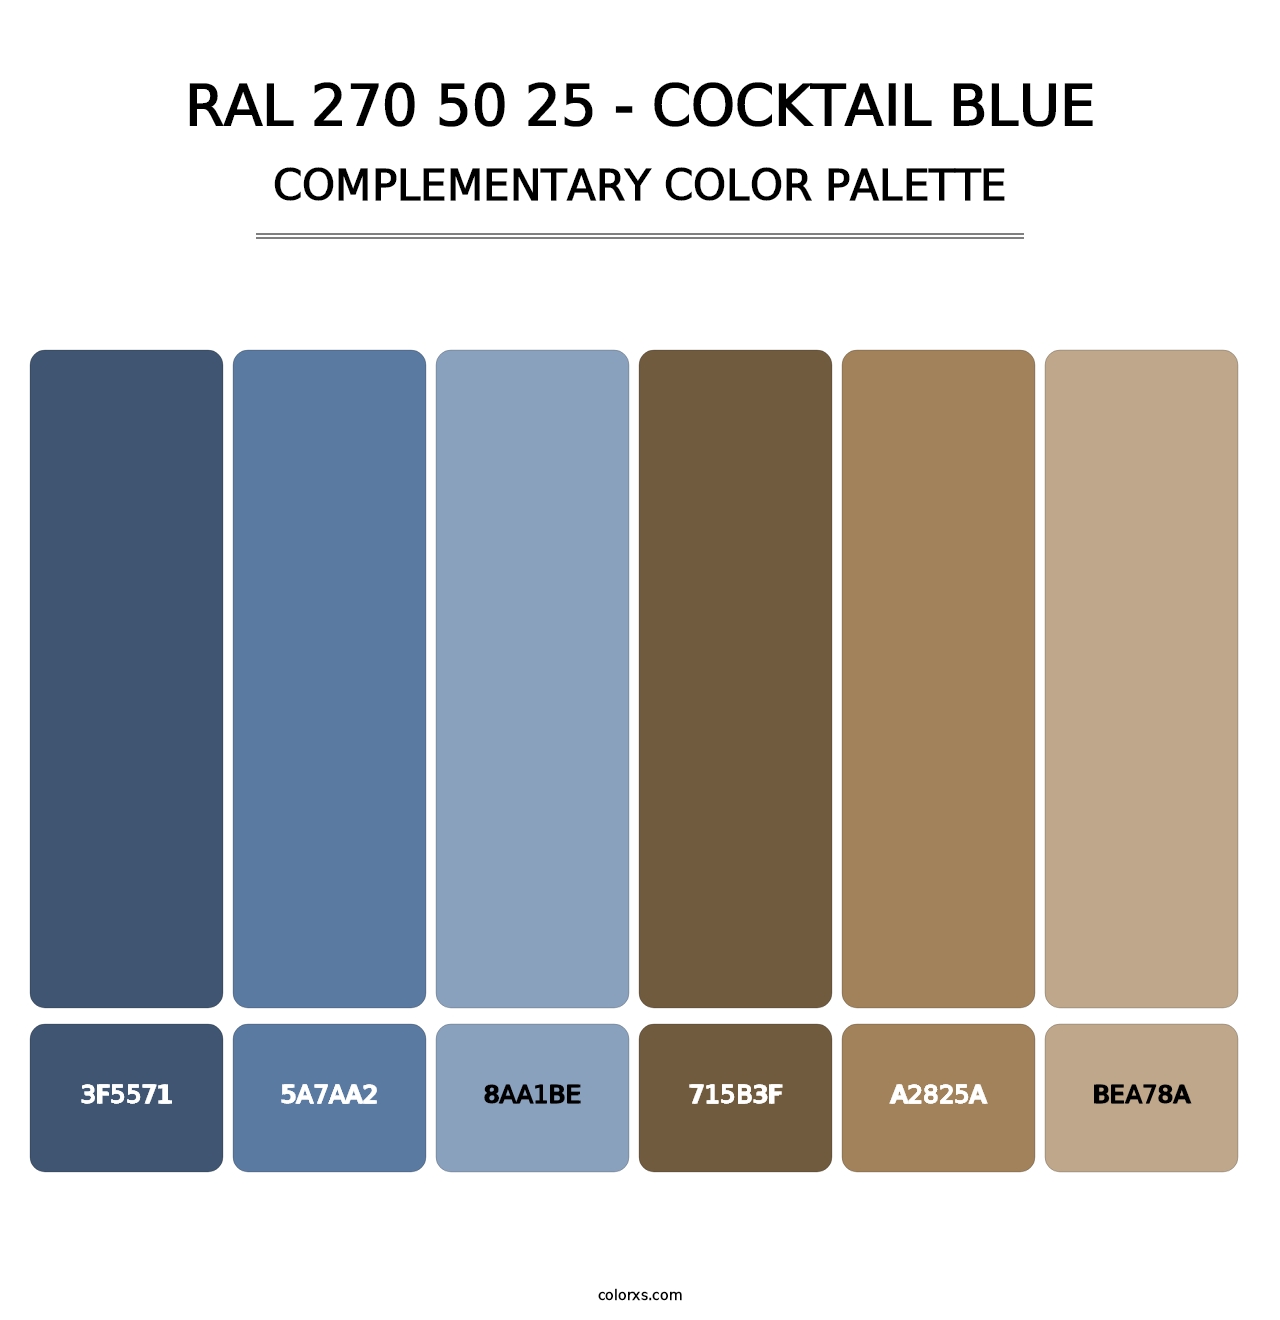 RAL 270 50 25 - Cocktail Blue - Complementary Color Palette